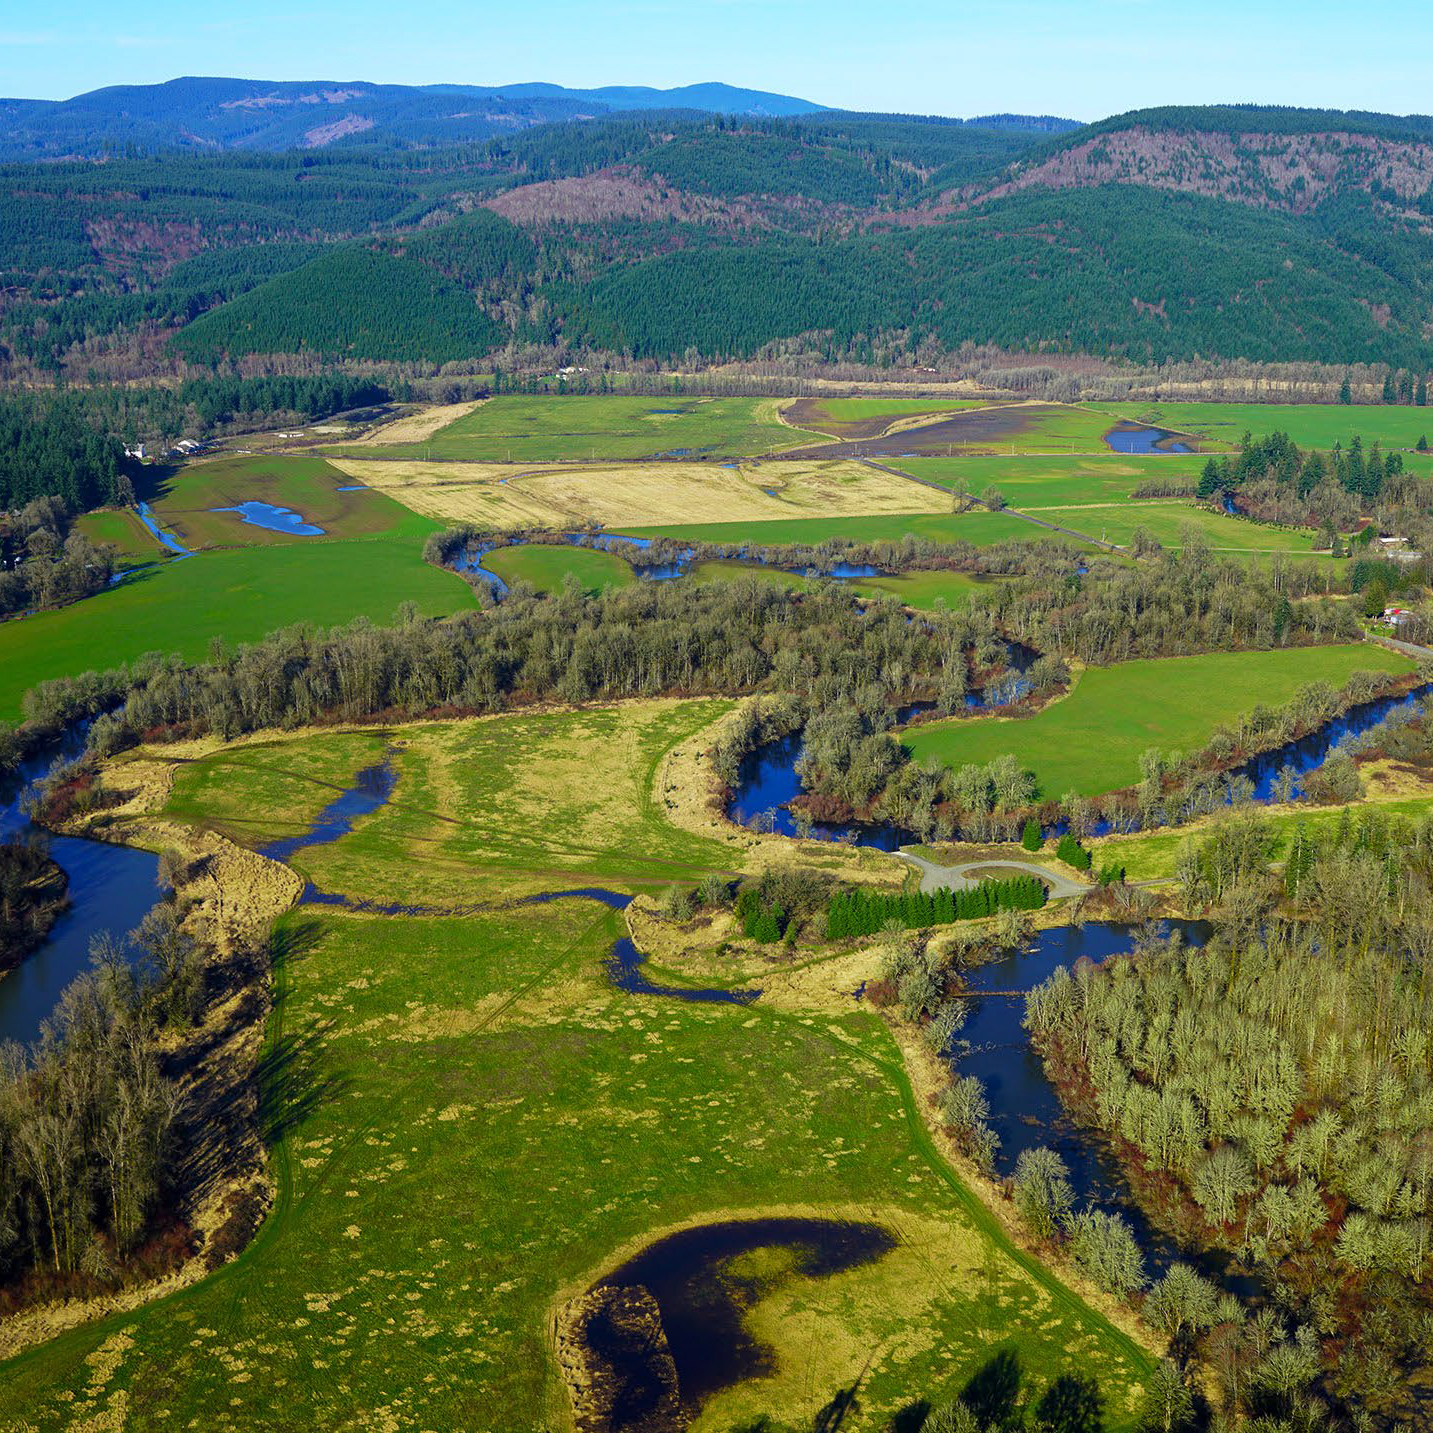 A meandering river, oxbow lakes, and wetlands among farmland and forested hills in the Chehalis Basin